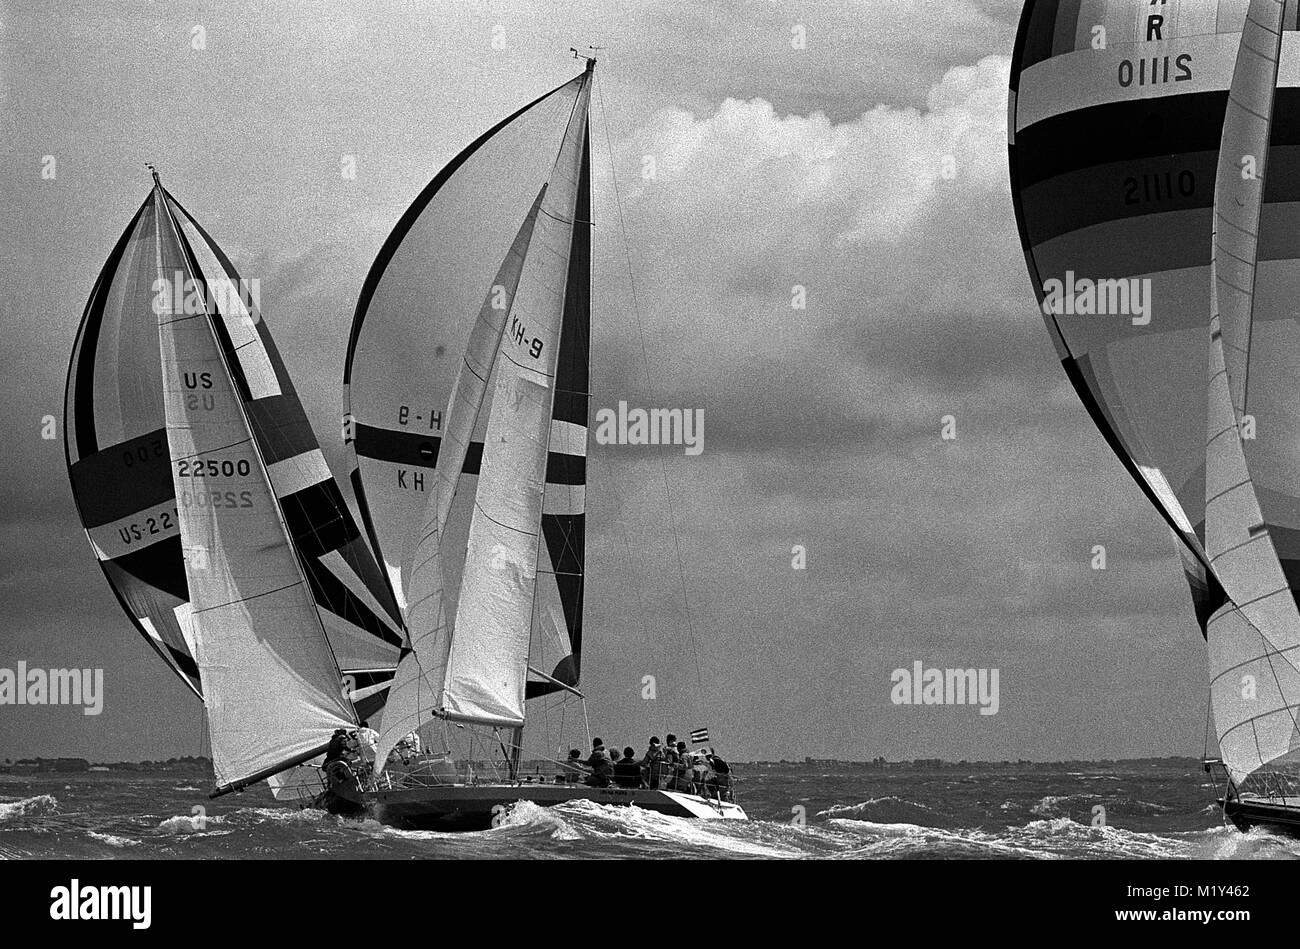 AJAXNETPHOTO. 1979. SOLENT, ENGLAND. - ADMIRAL'S CUP - SOLENT INSHORE RACE. (L-R) WILLIWAW (USA), FOLLOWED BY UIN NA MARA IV (HK) AND SINGAPORE'S APOLLO IV, DANCE TO THE BREEZY CONDITIONS. PHOTO:JONATHAN EASTLAND/AJAX REF:79 Stock Photo